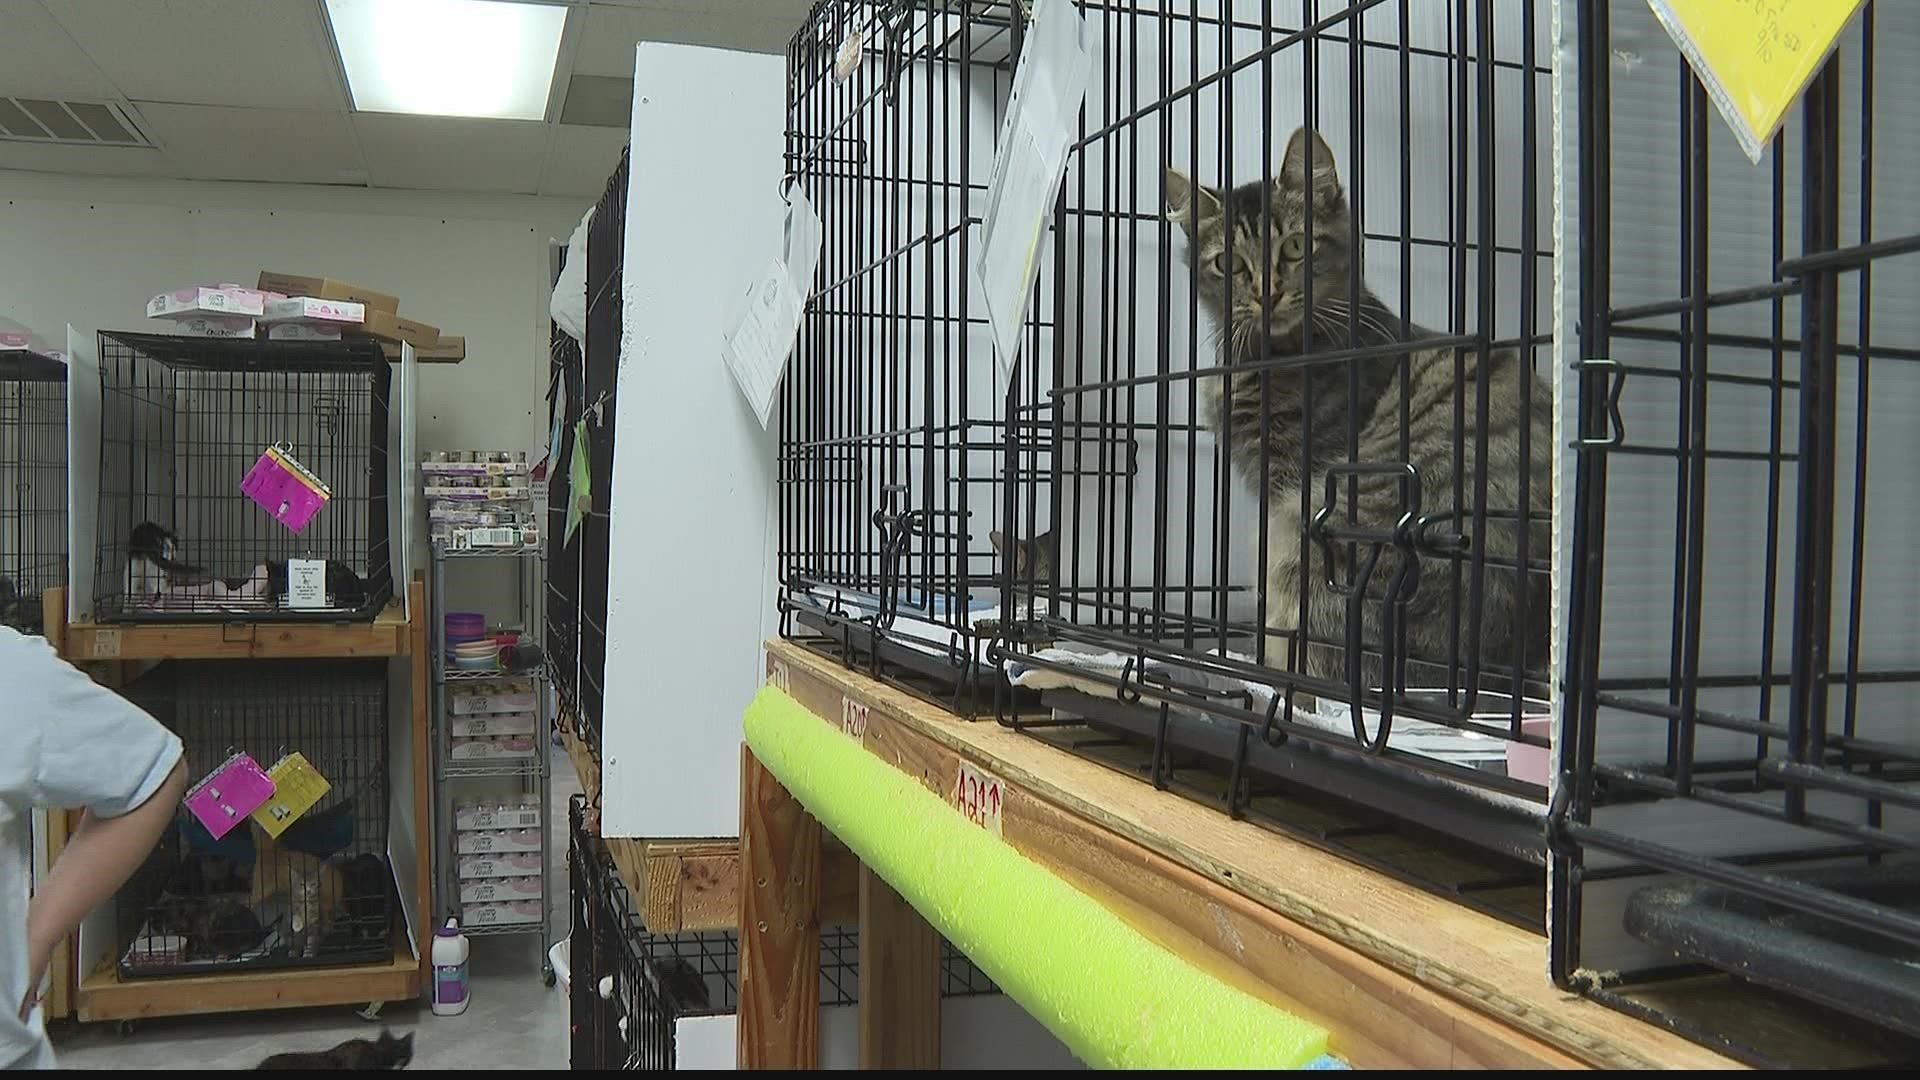 Some community heroes braved the weather to save dozens of animals as the Chattooga County Animal Shelter began to flood.